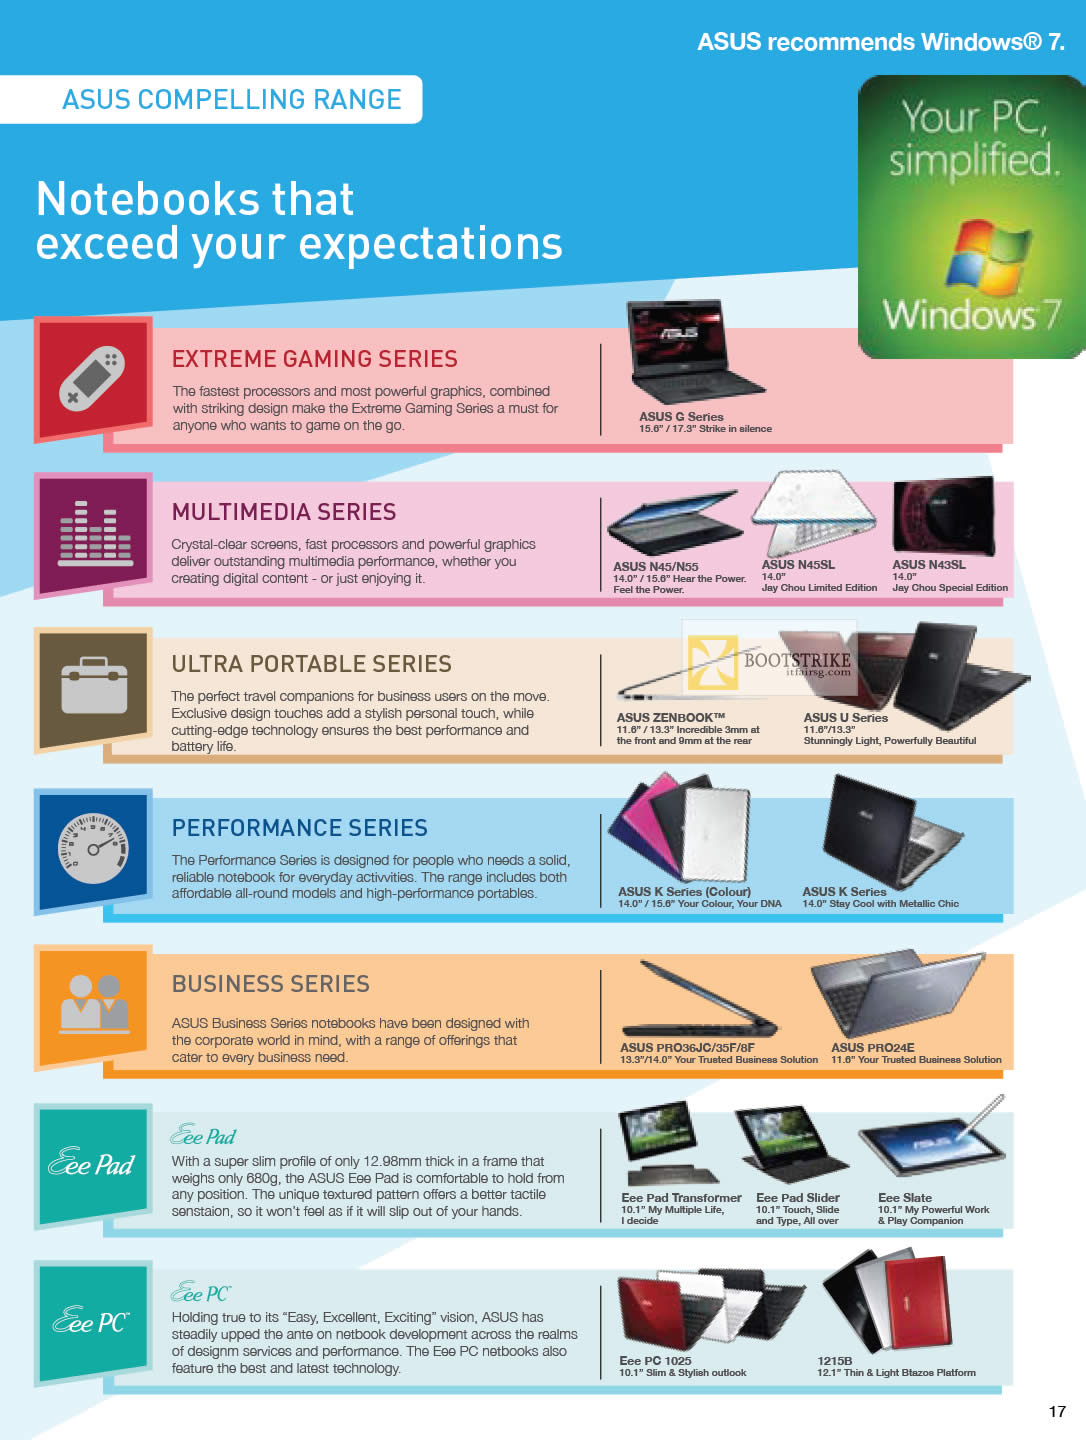 IT SHOW 2012 price list image brochure of ASUS Notebooks Series, Extreme Gaming, Multimedia, Ultra Portable, Performance, Business, Eee Pad, Eee PC